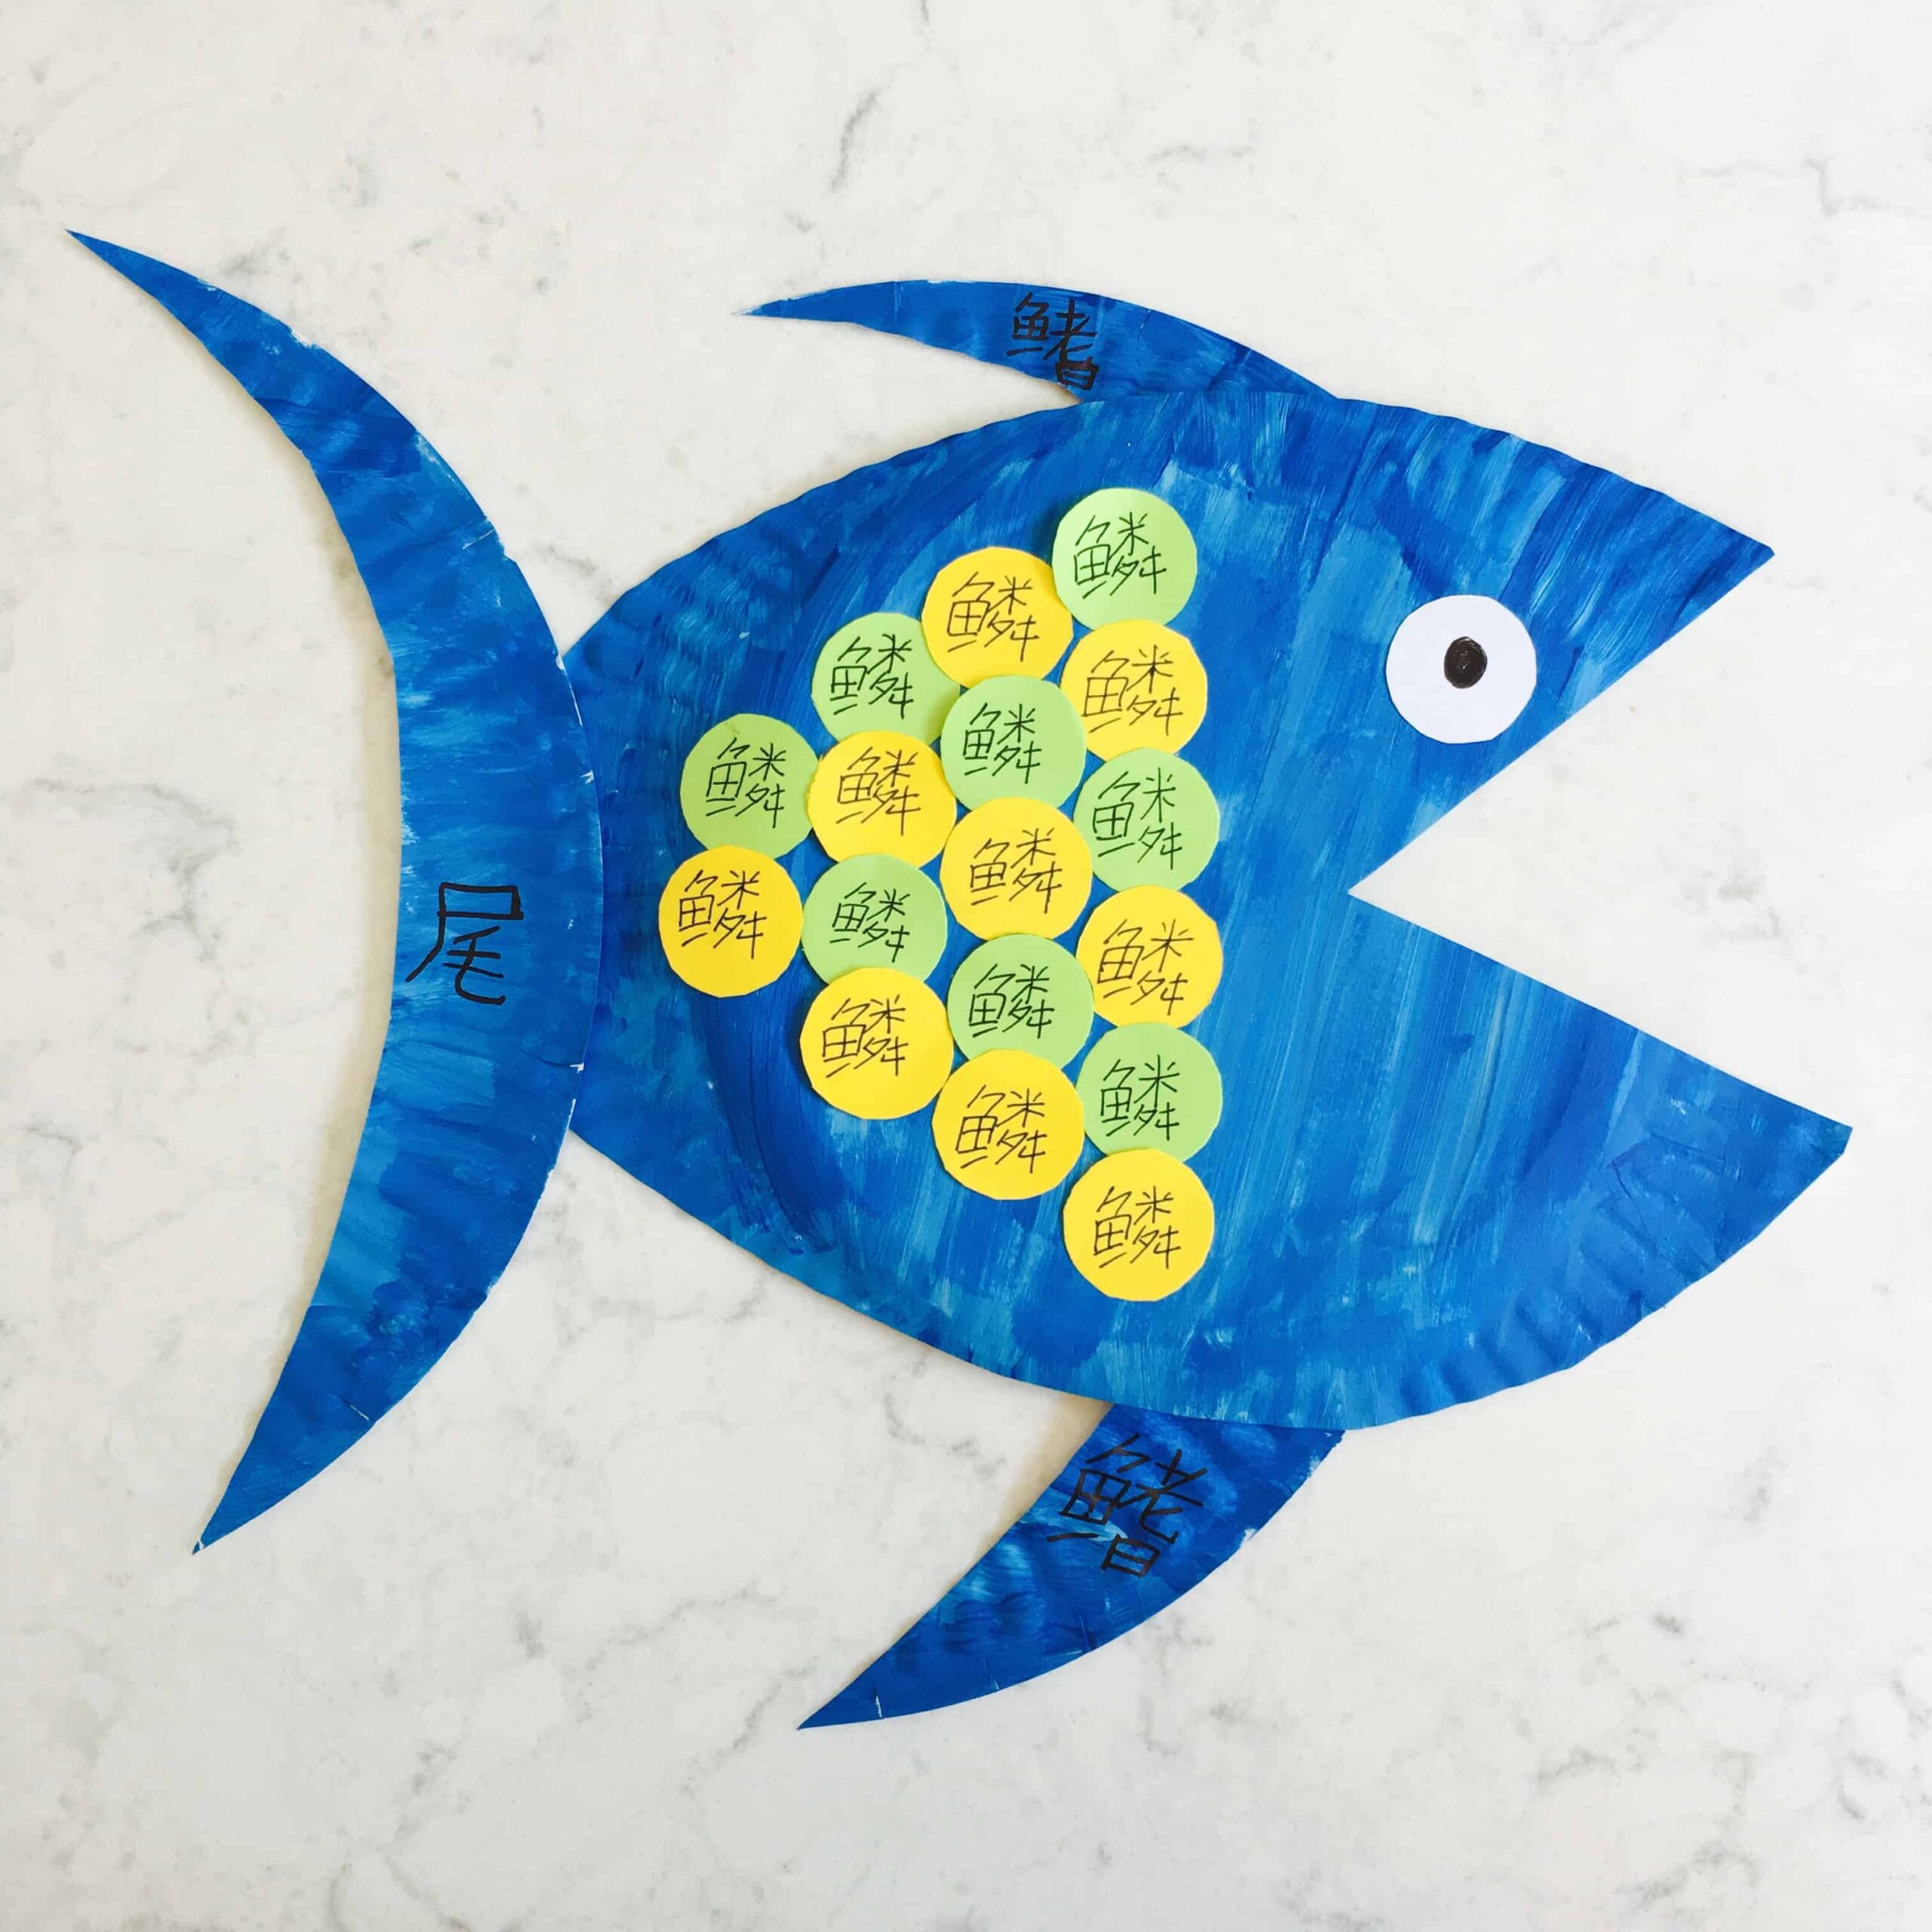 Fish Anatomy Paper Plate Craft – Fun Learning Activity for Kids!